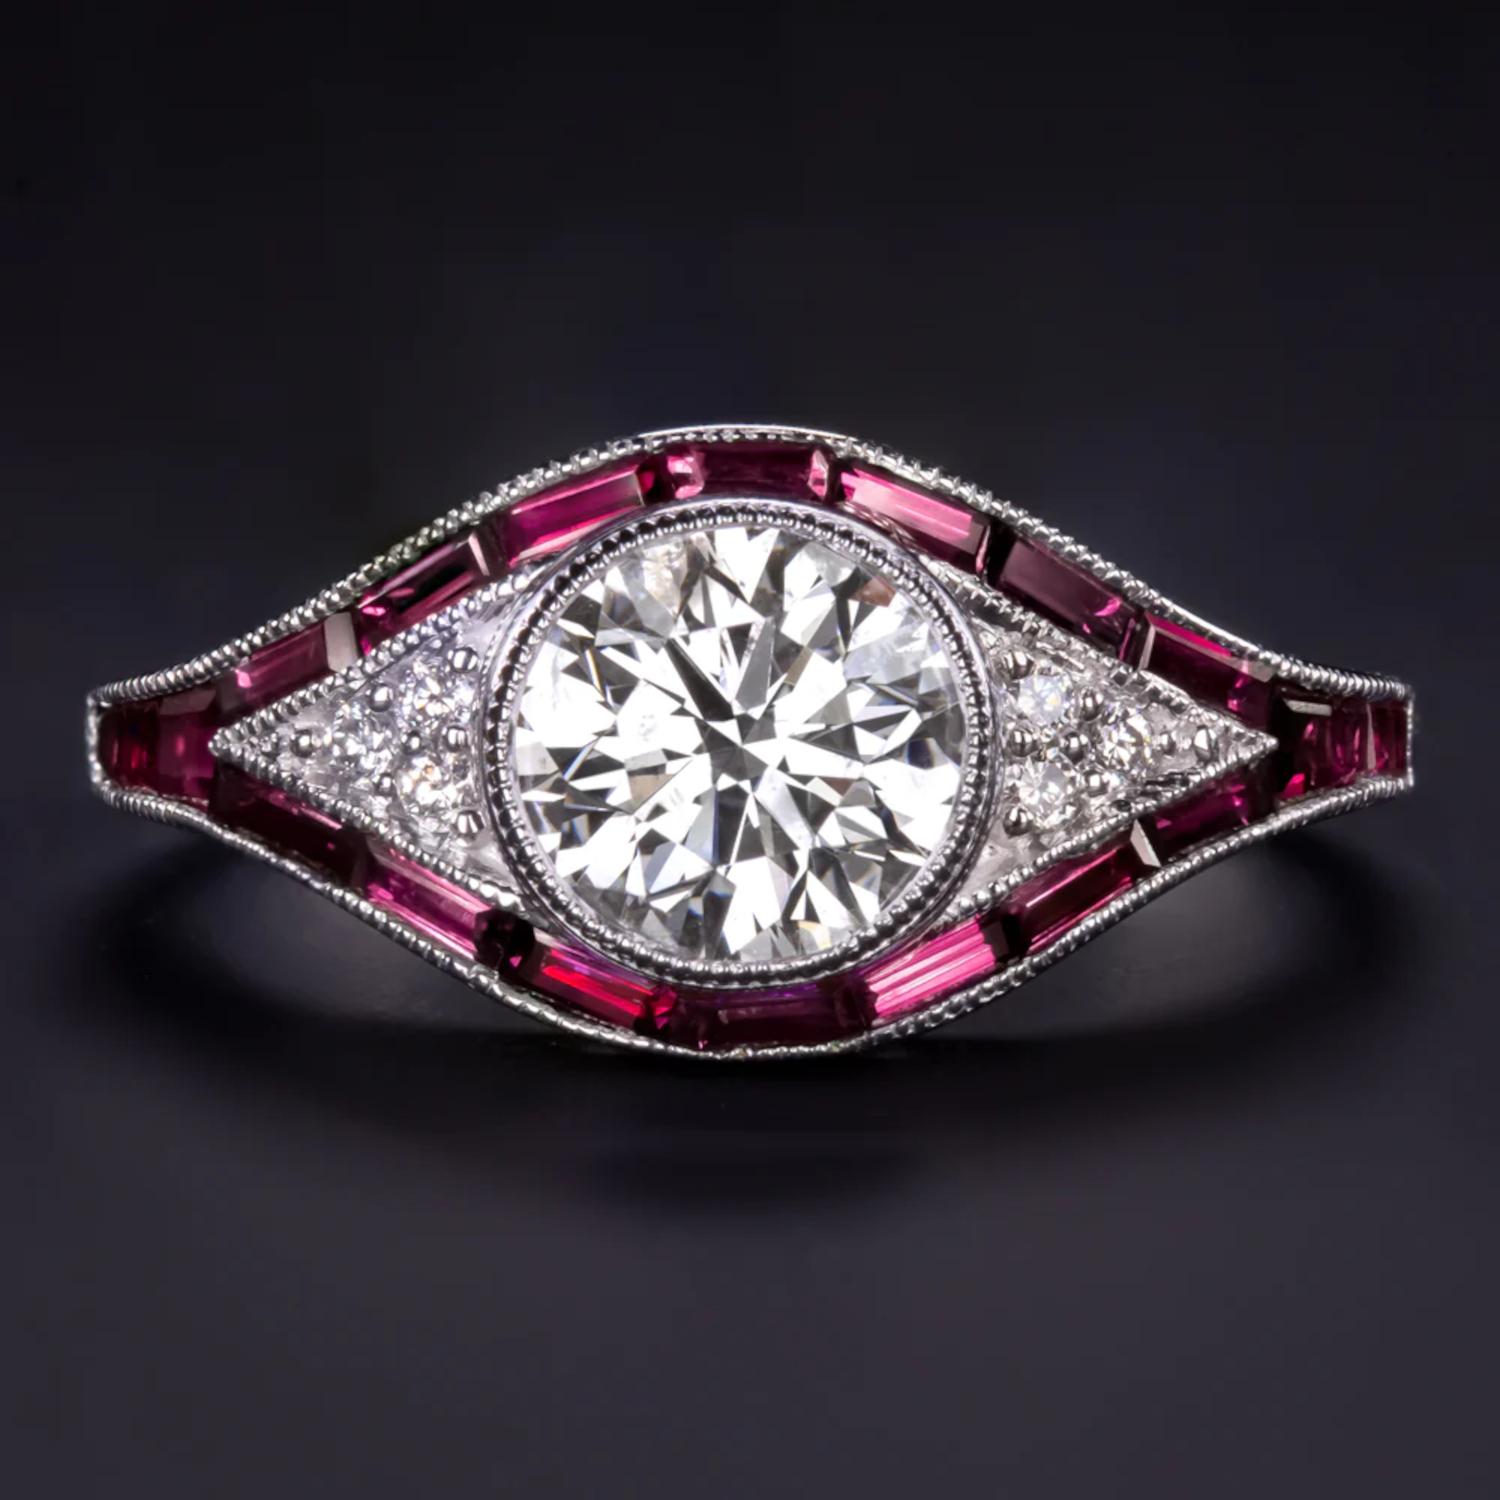 Gorgeous vintage art deco style design ring, the main diamond weighs 1.16 carat and is graded F-G in color and SI2 in clarity (eye clean).
The accent stones are diamonds (0.5 carat) and rubies (0.83 carat).
The diamonds are brilliantly white and